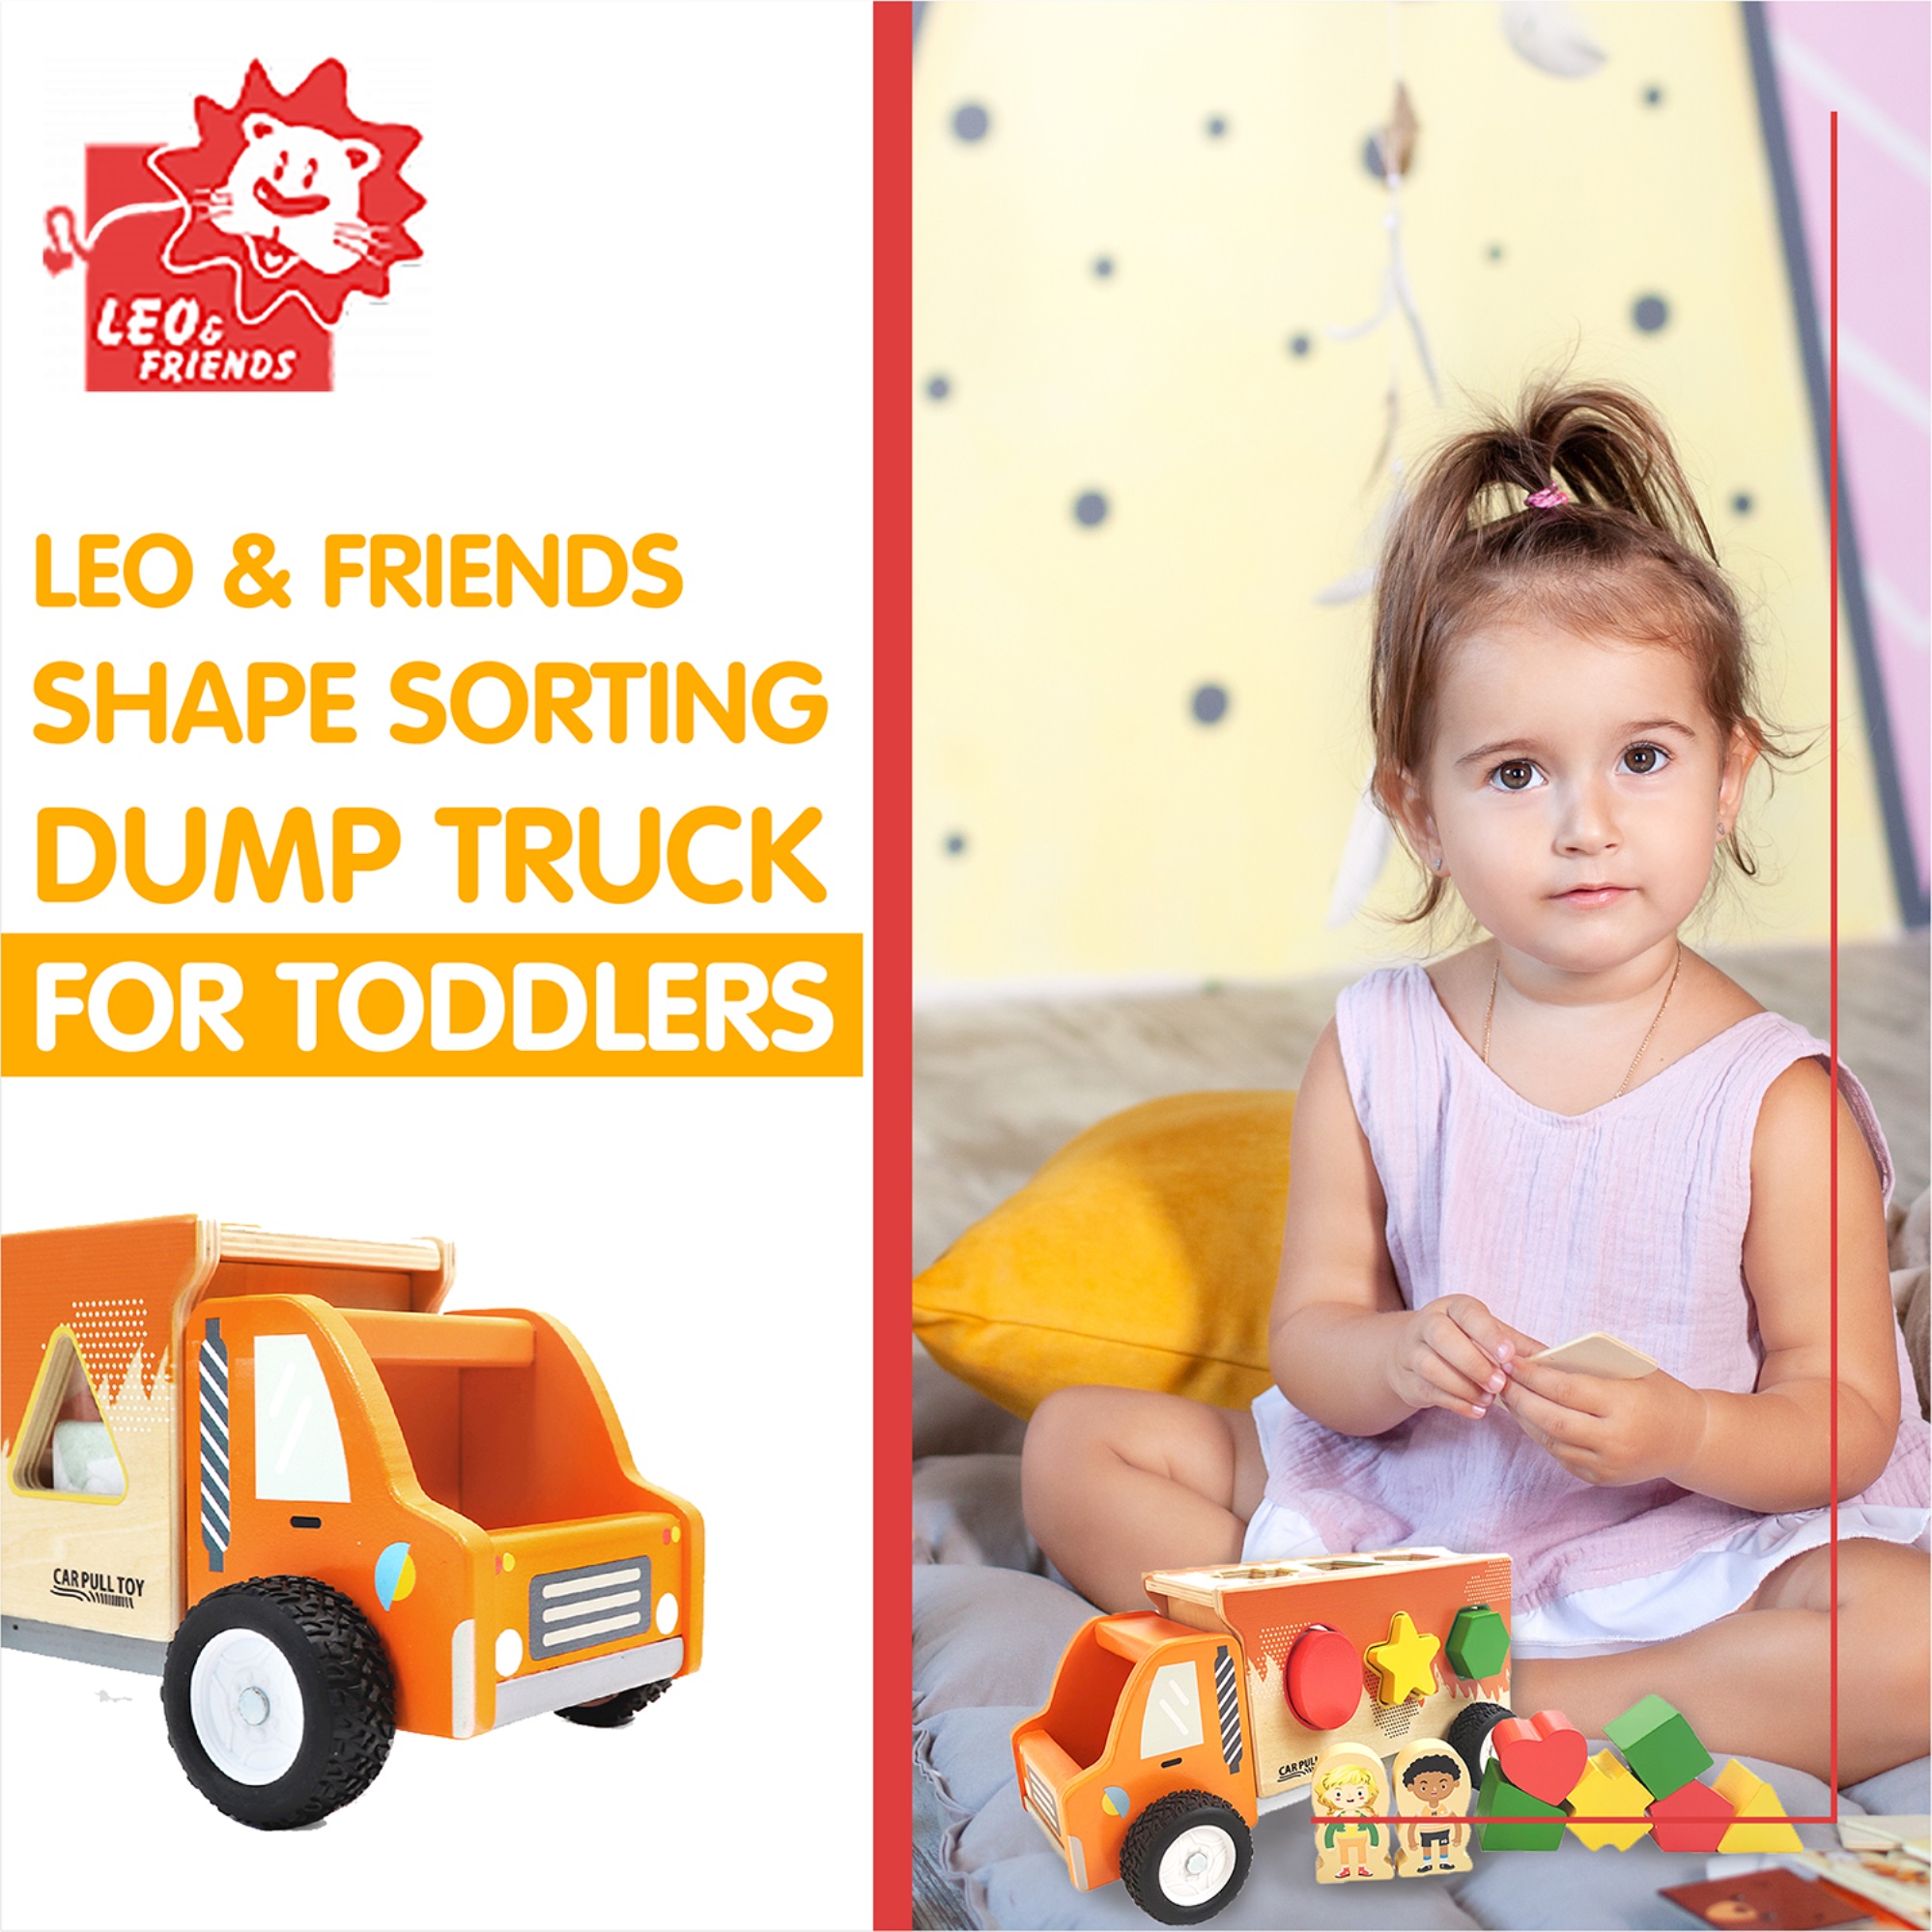 Leo & Friends Shapes & Colors Sorting Dump Truck for Toddlers - image 3 of 8